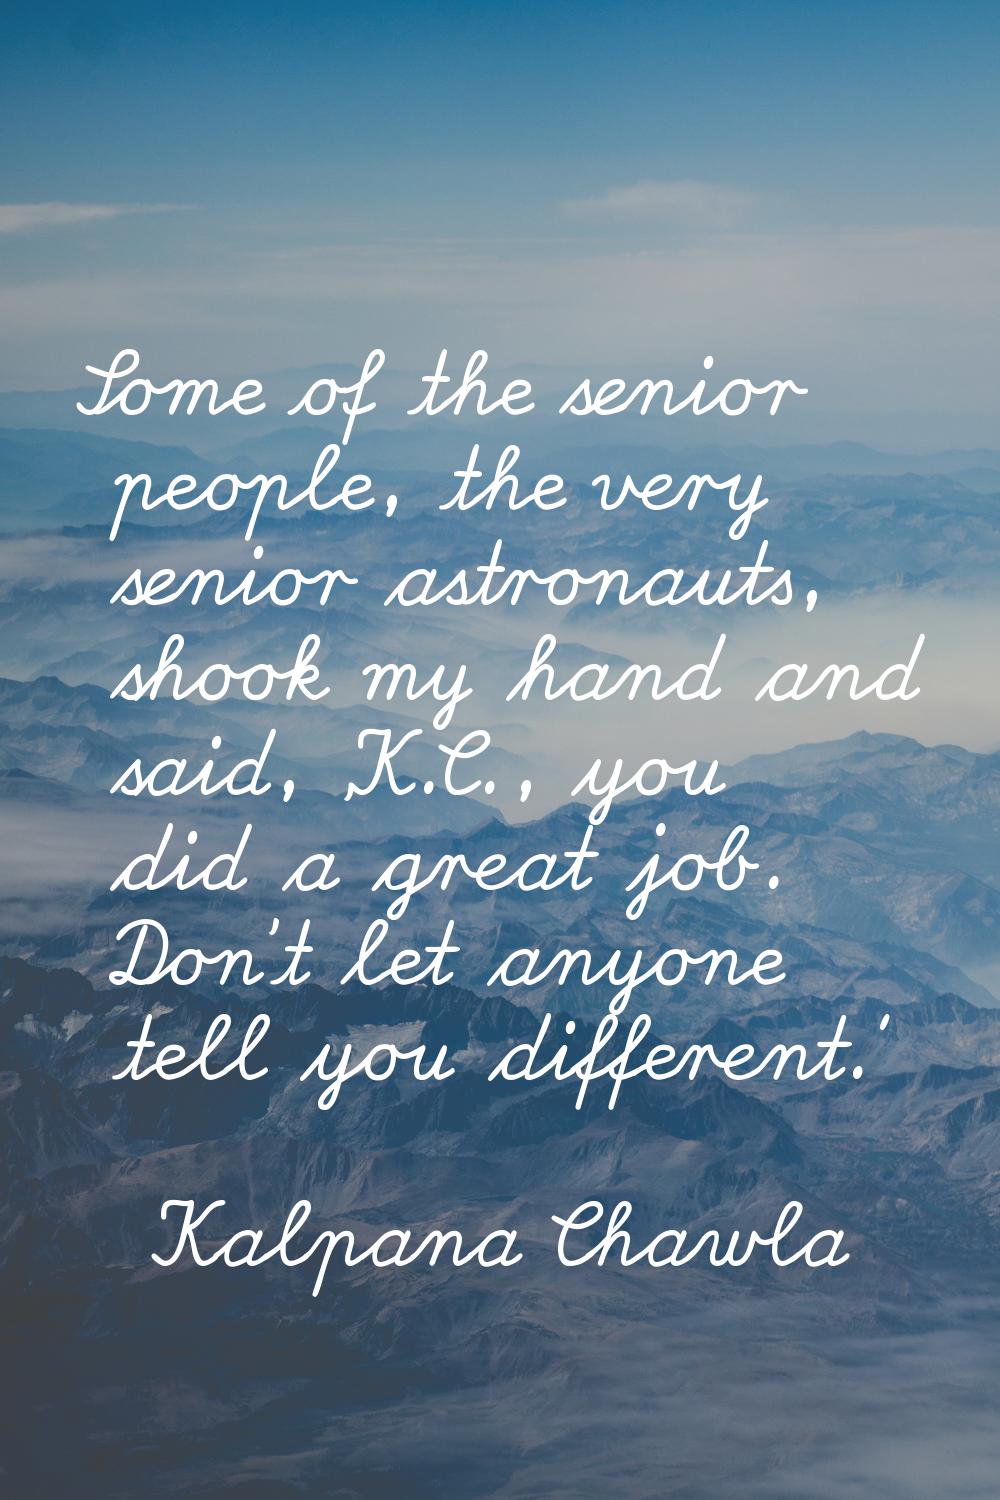 Some of the senior people, the very senior astronauts, shook my hand and said, 'K.C., you did a gre